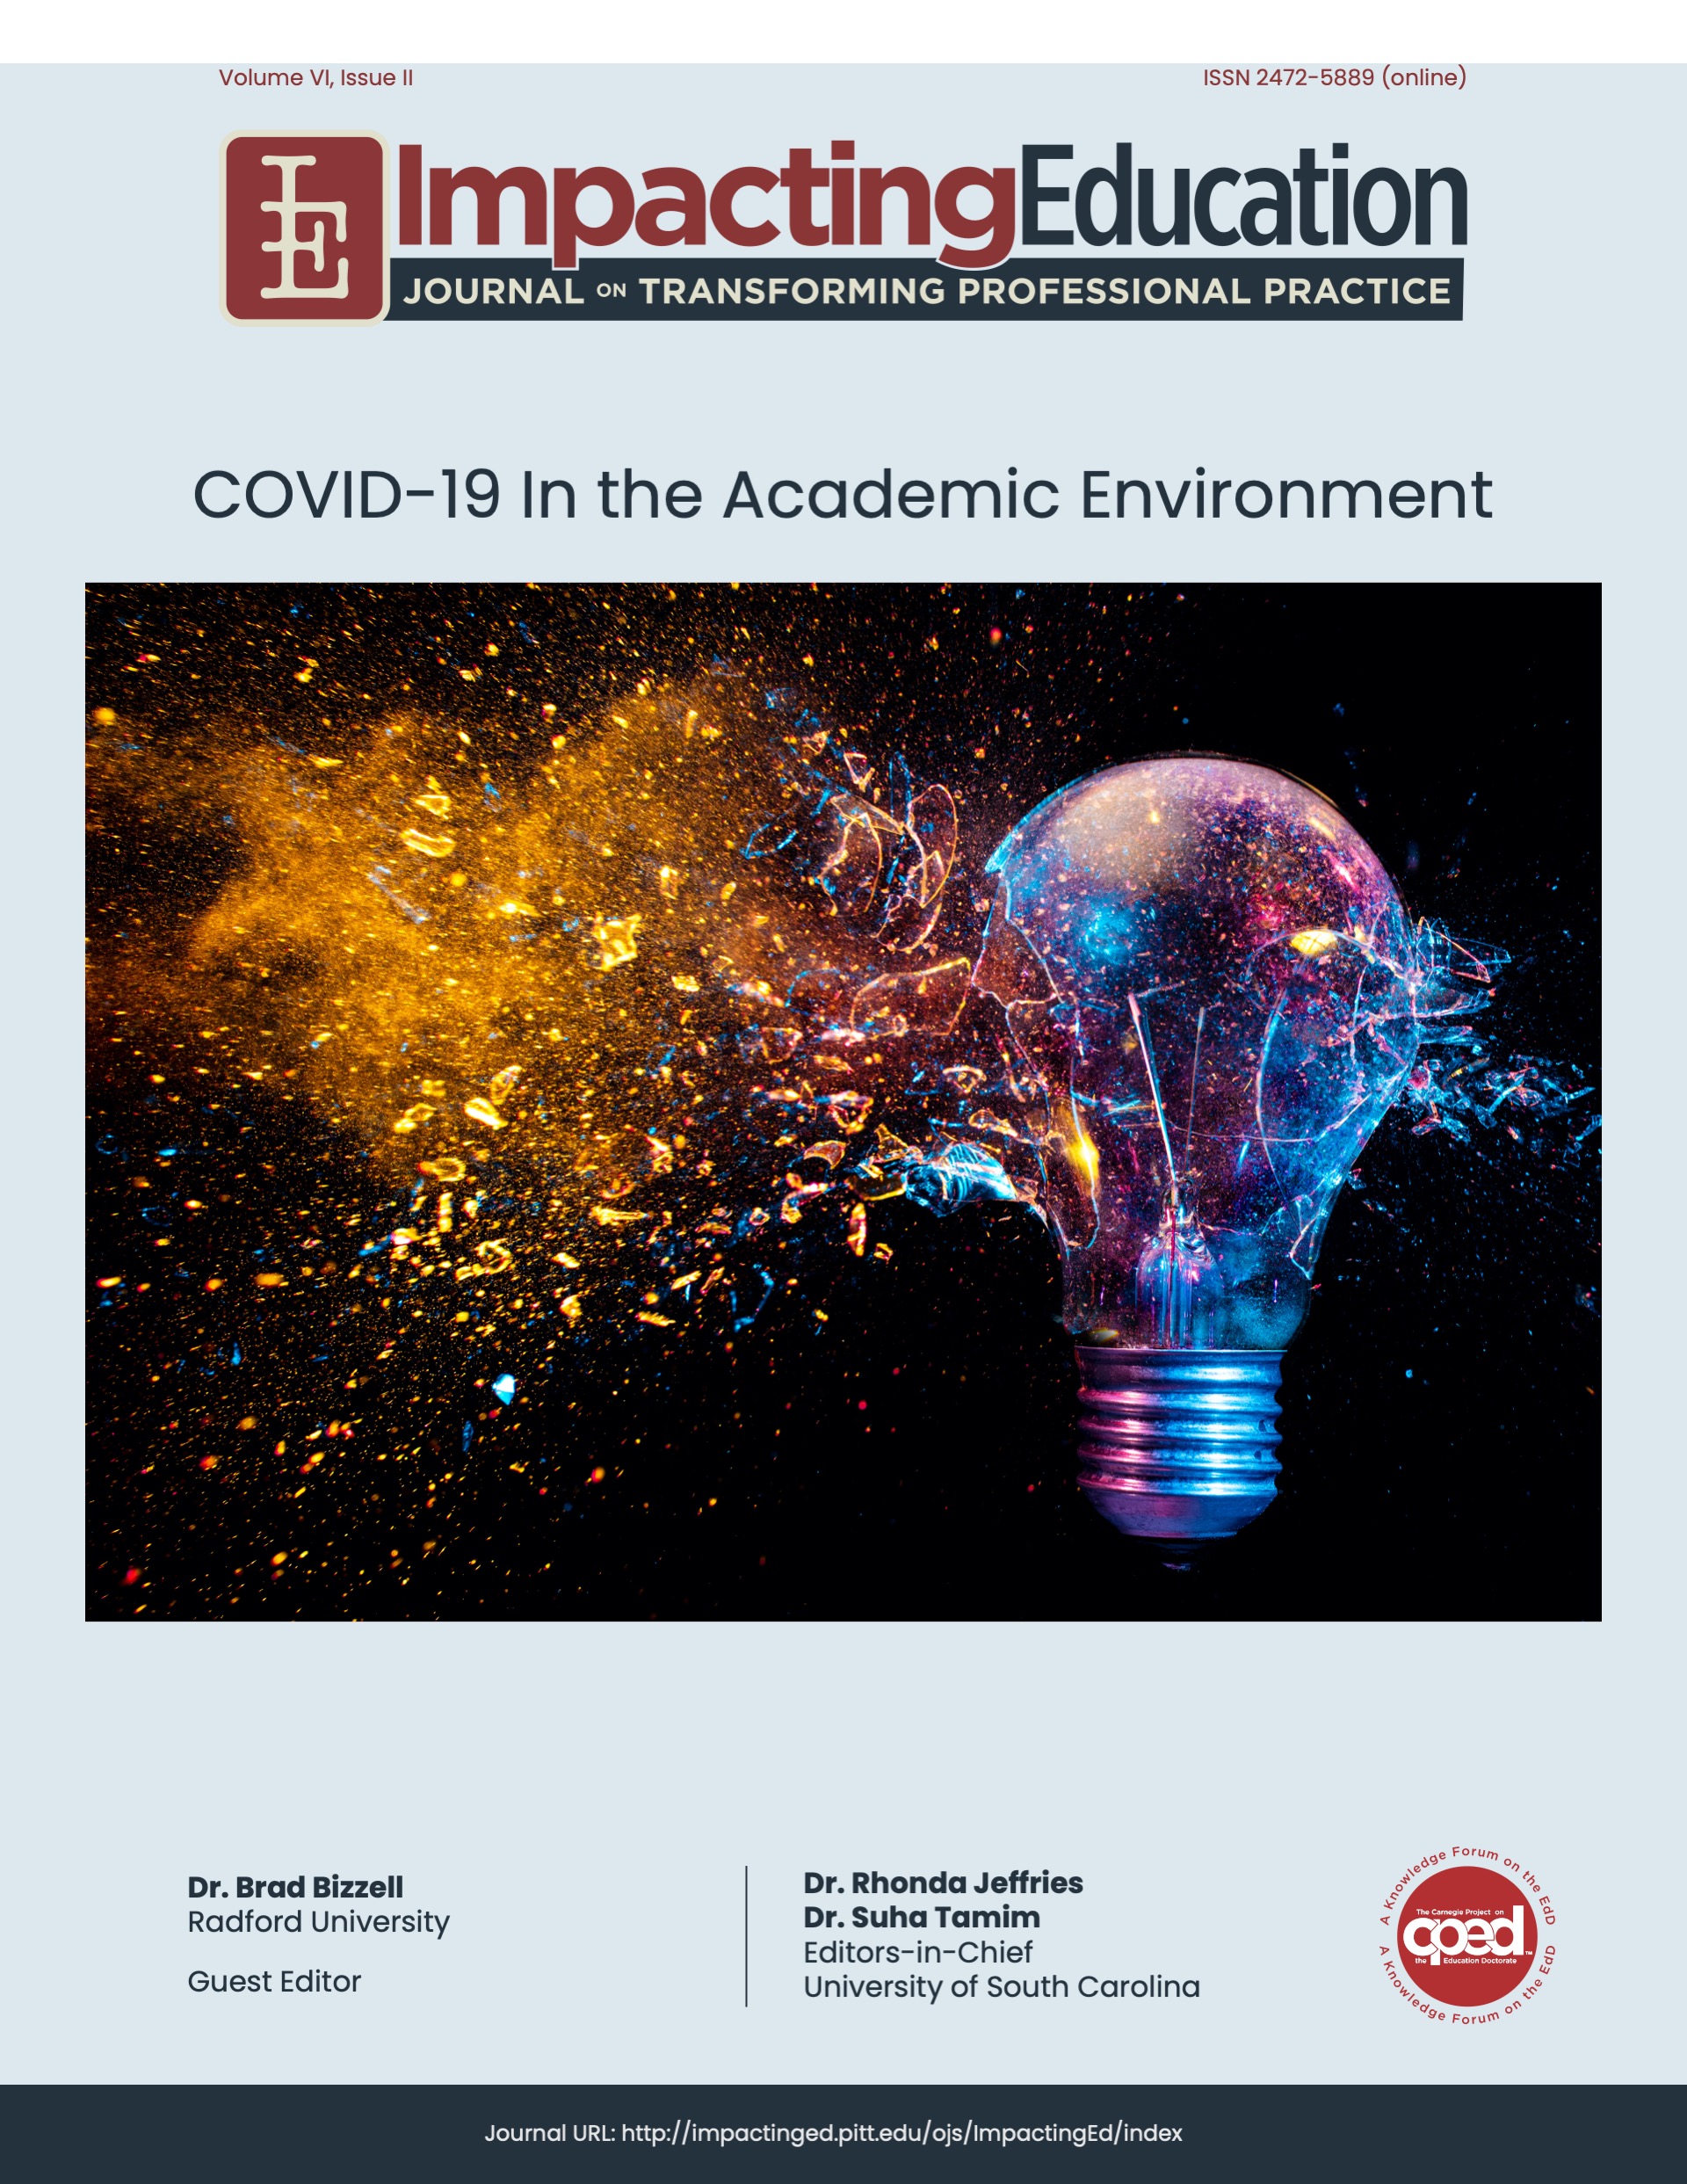 					View Vol. 6 No. 2 (2021): COVID-19 IN THE ACADEMIC ENVIRONMENT
				